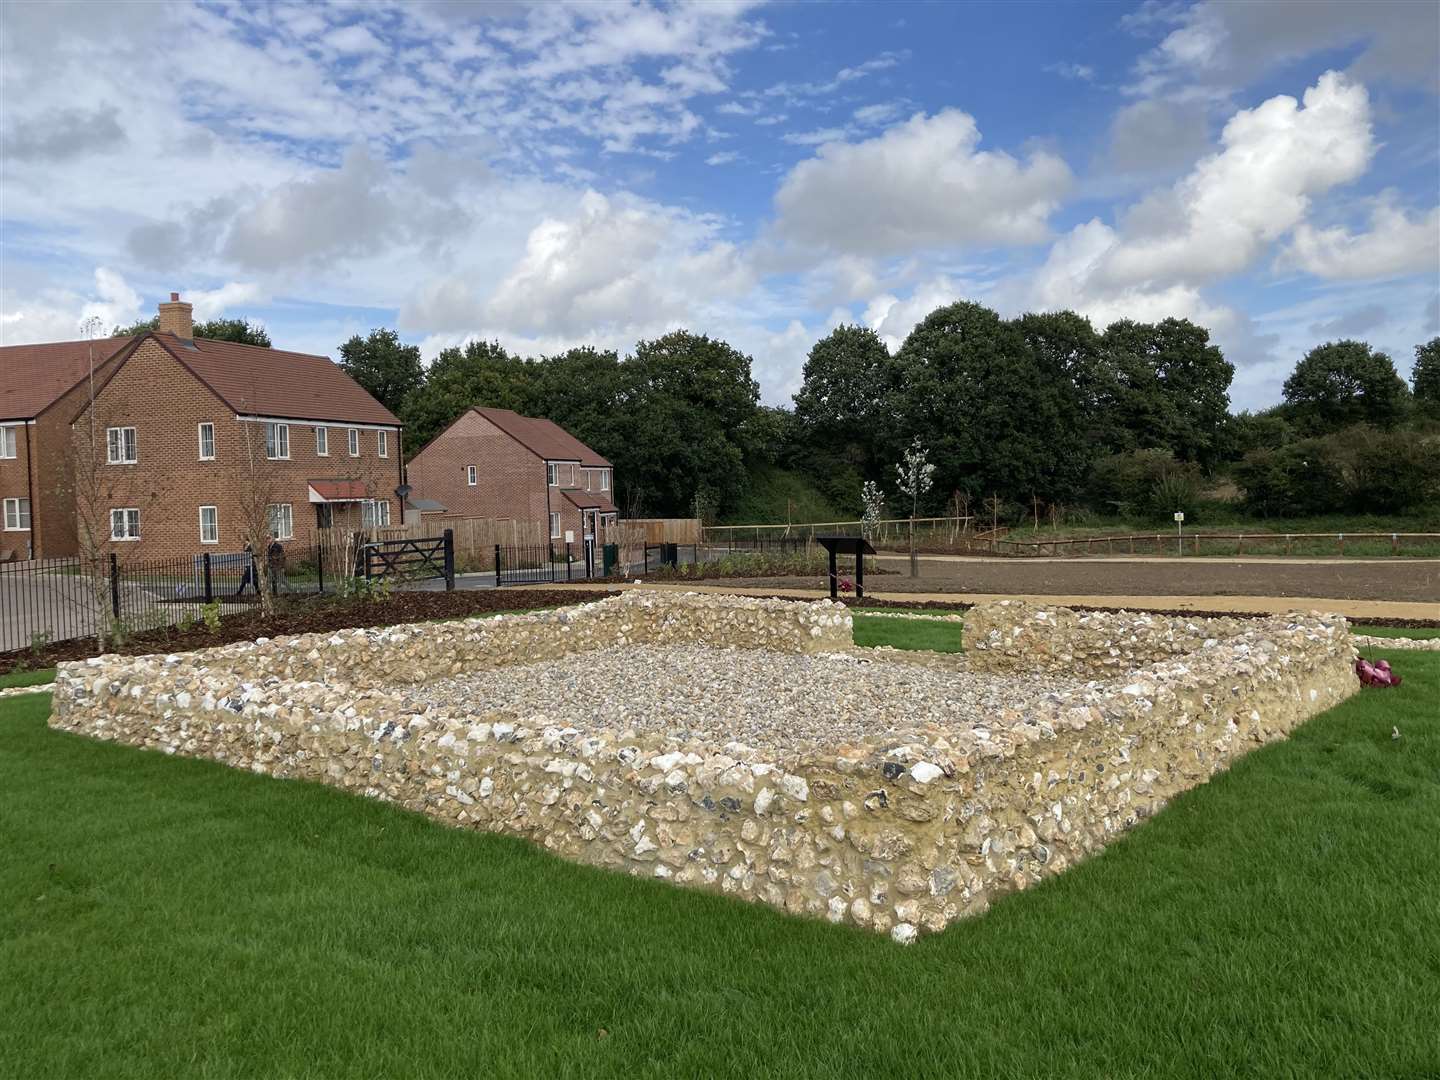 The recreation of the 2,000-year-old Romano-British temple discovered at Newington near Sittingbourne